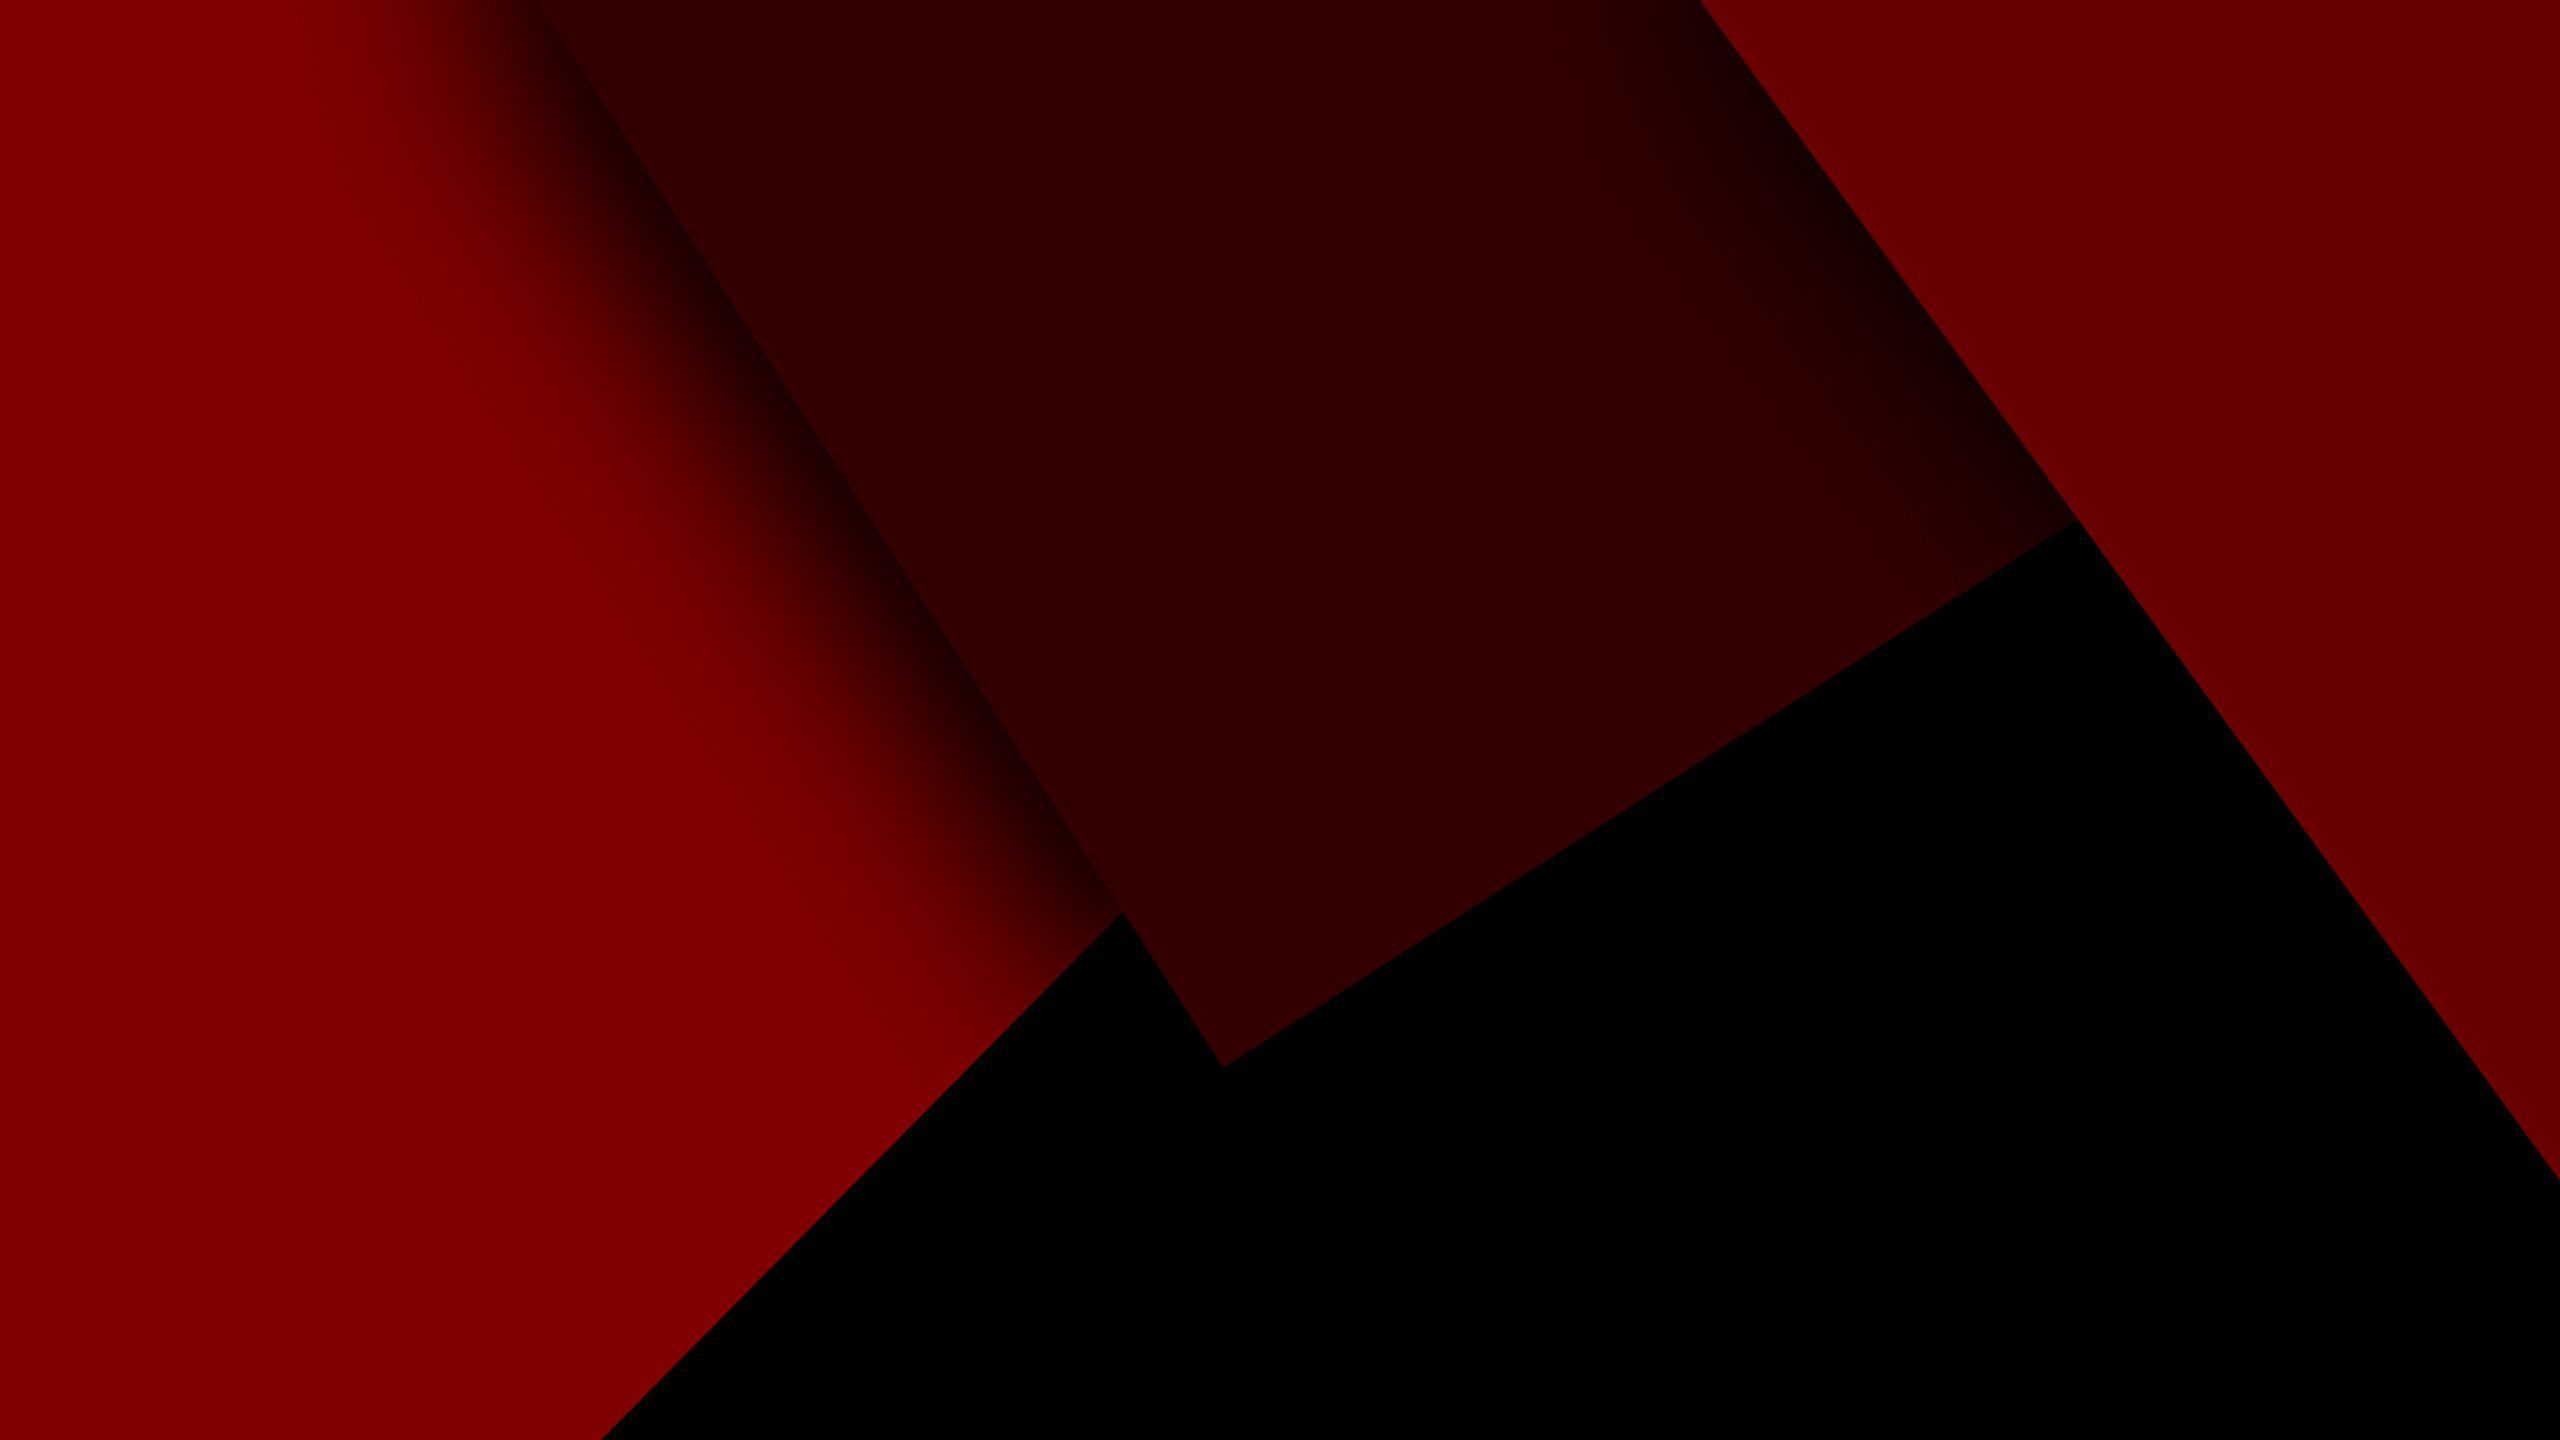 A red and black abstract wallpaper - Dark red